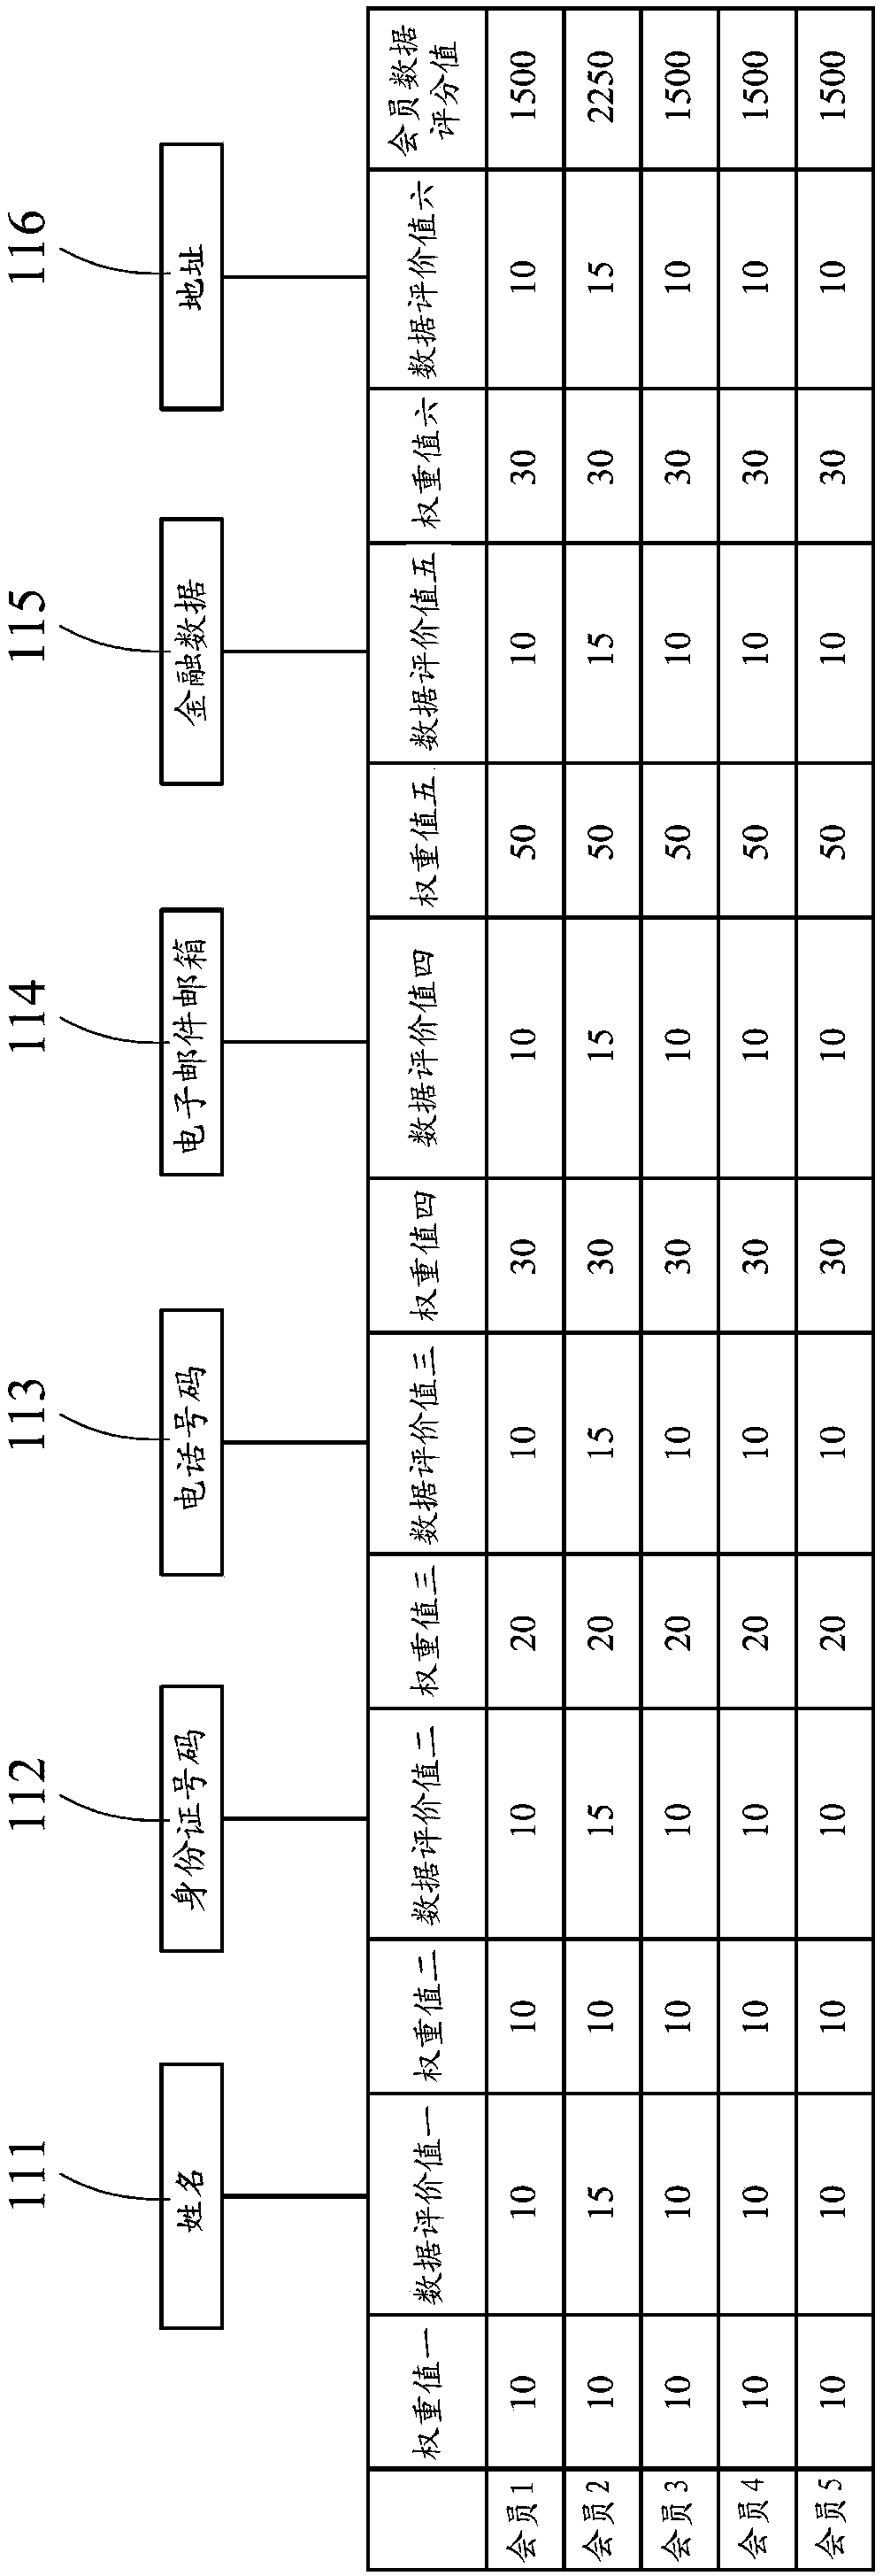 Network ticket purchasing system